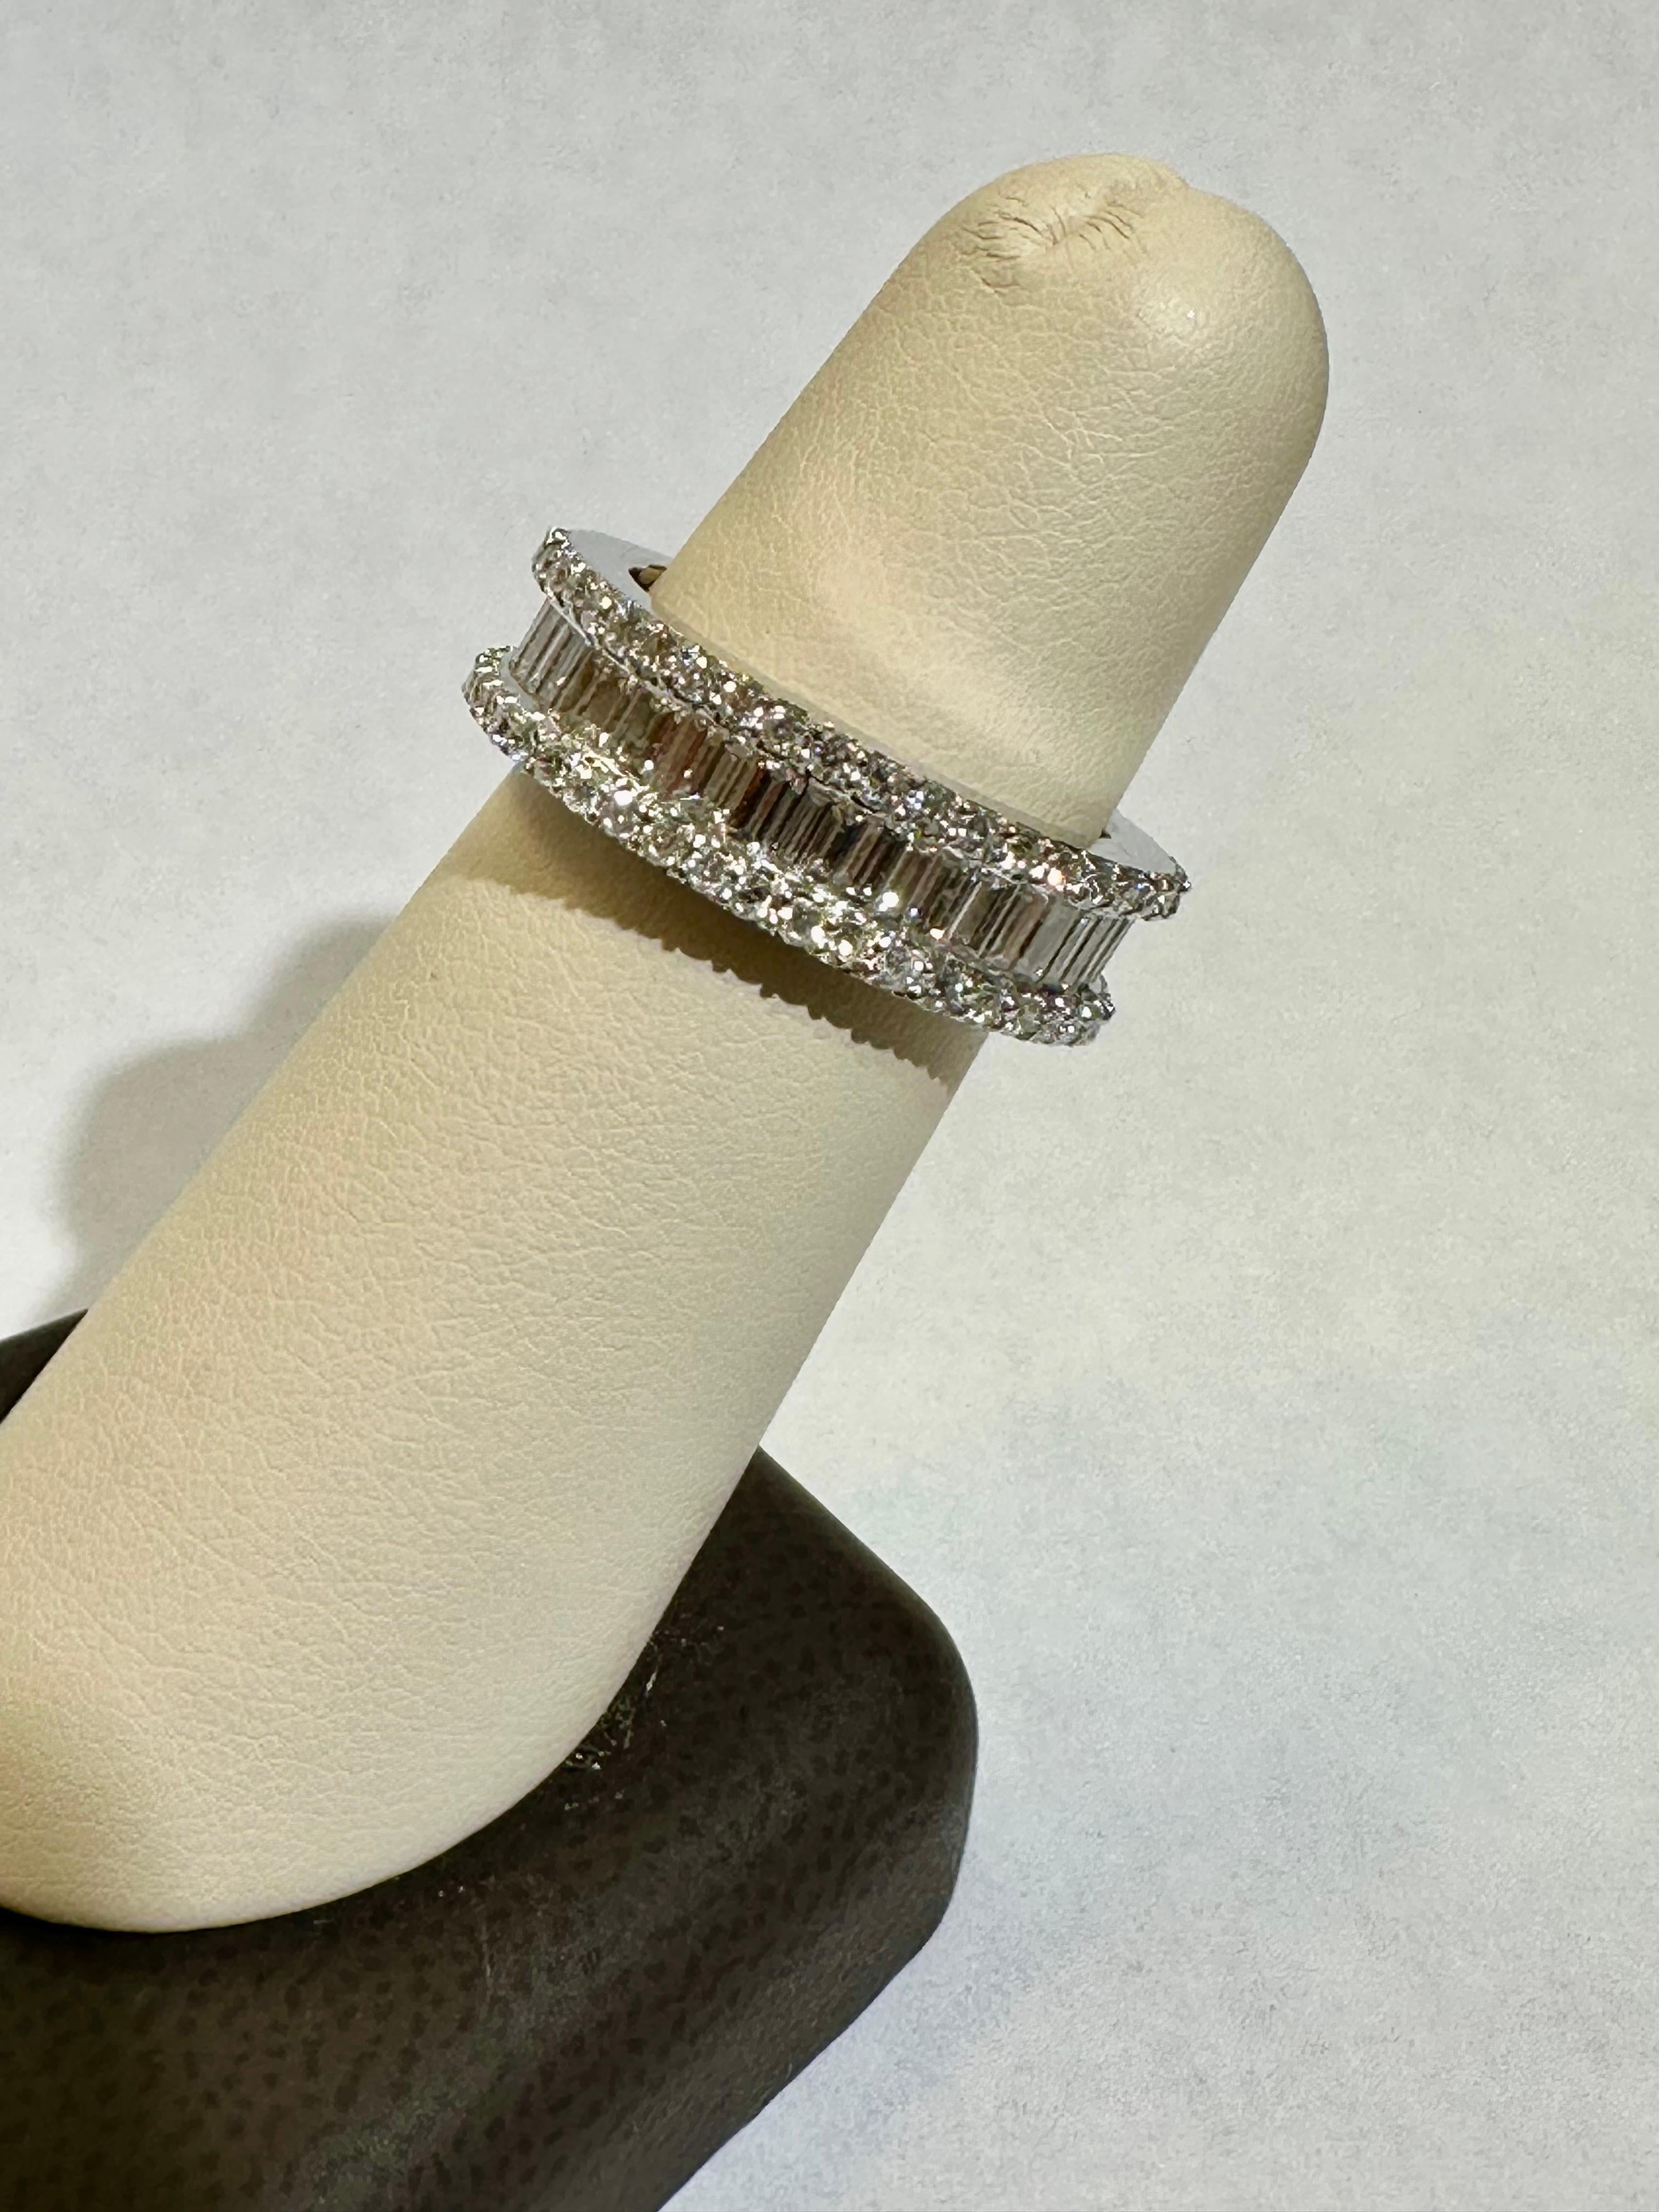  Diamond Eternity Band with Baguette & Round Diamonds  2.70 CT T.W. 18K W. G.

Description / Condition: New.  All jewelry has been professionally scrutinized and cleaned prior to being offered for sale. 

Manufacturer: Custom made by A Step Back in